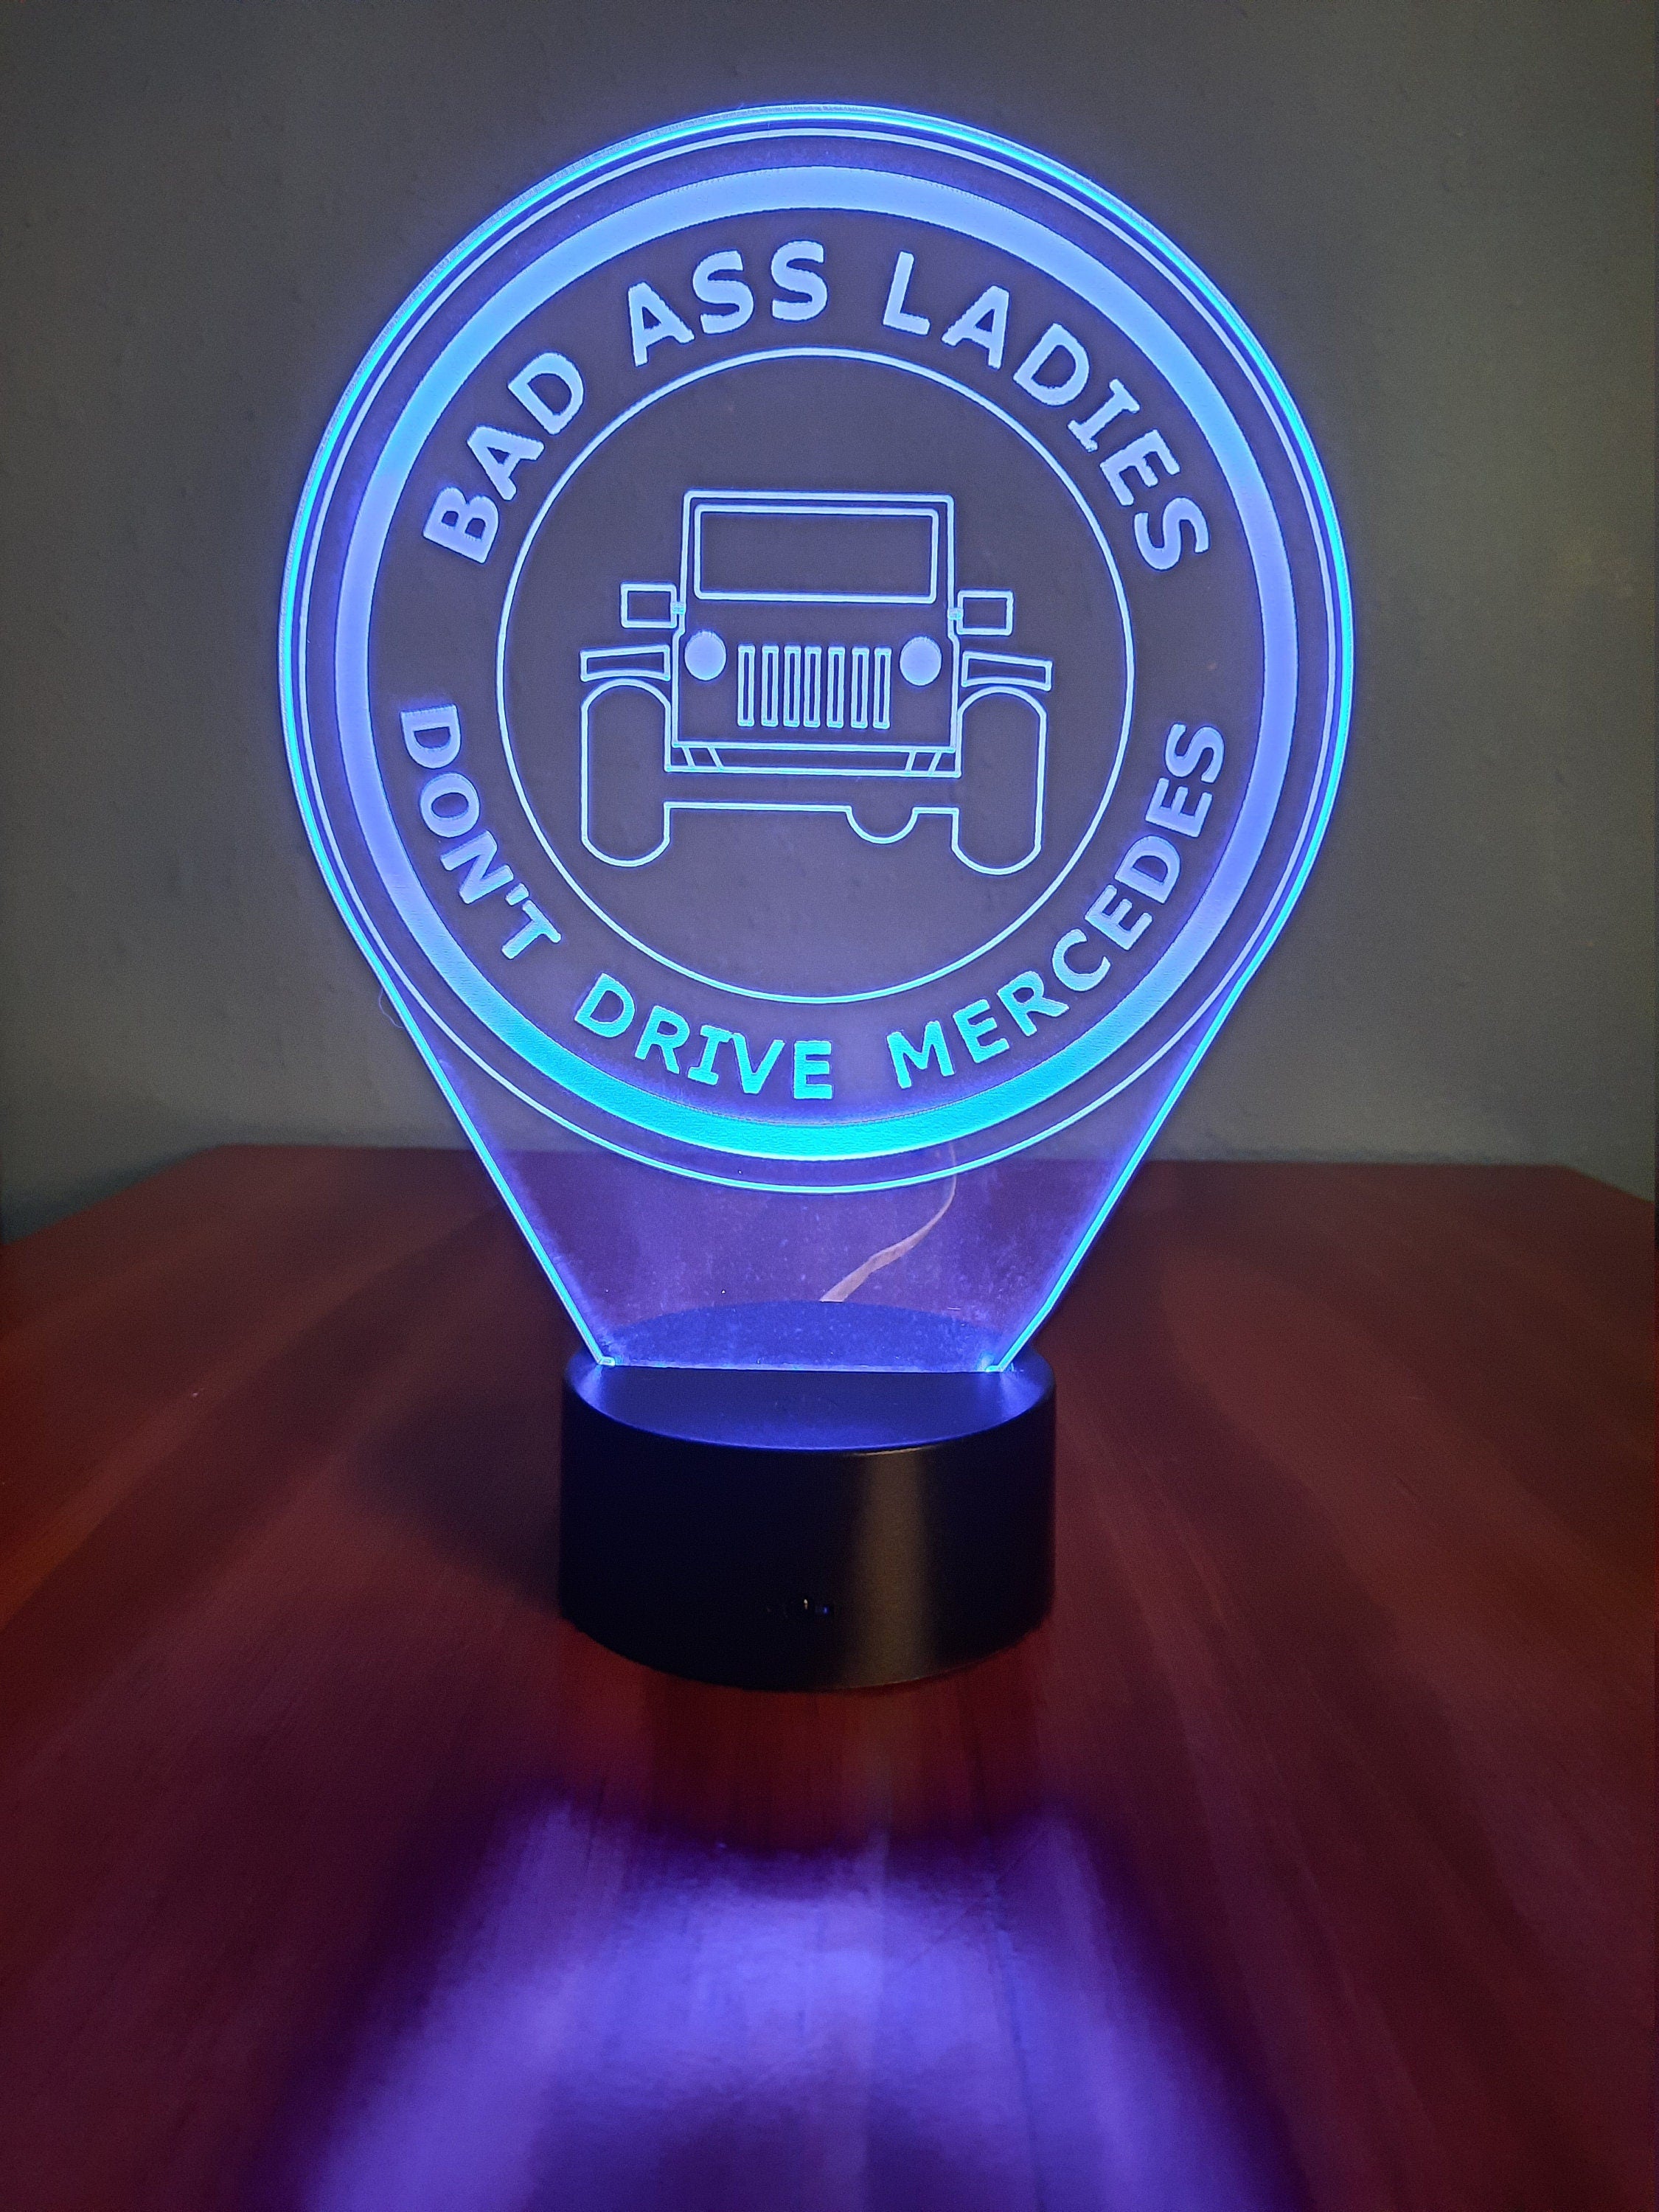 Awesome "Bad Ass Ladies Don't Drive Mercedes" LED Lamp (1264)